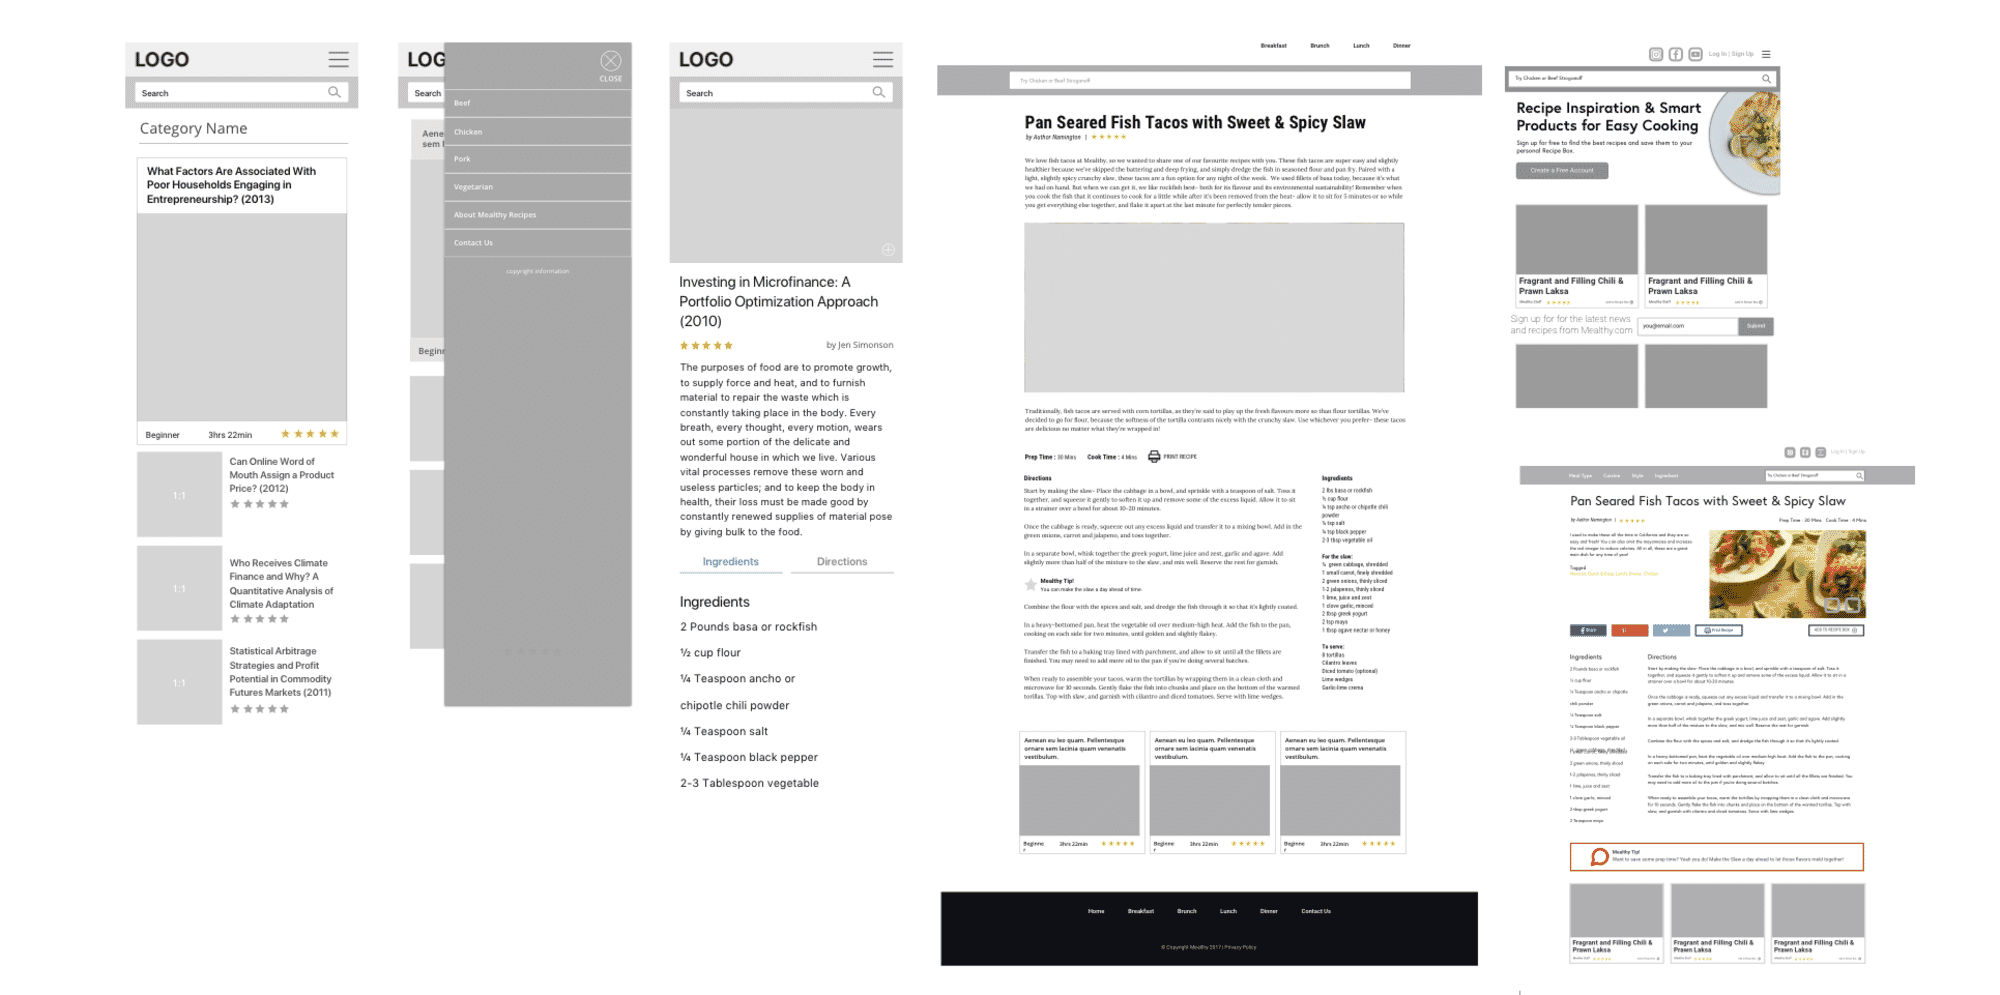 the progression of the recipe page over several iterations